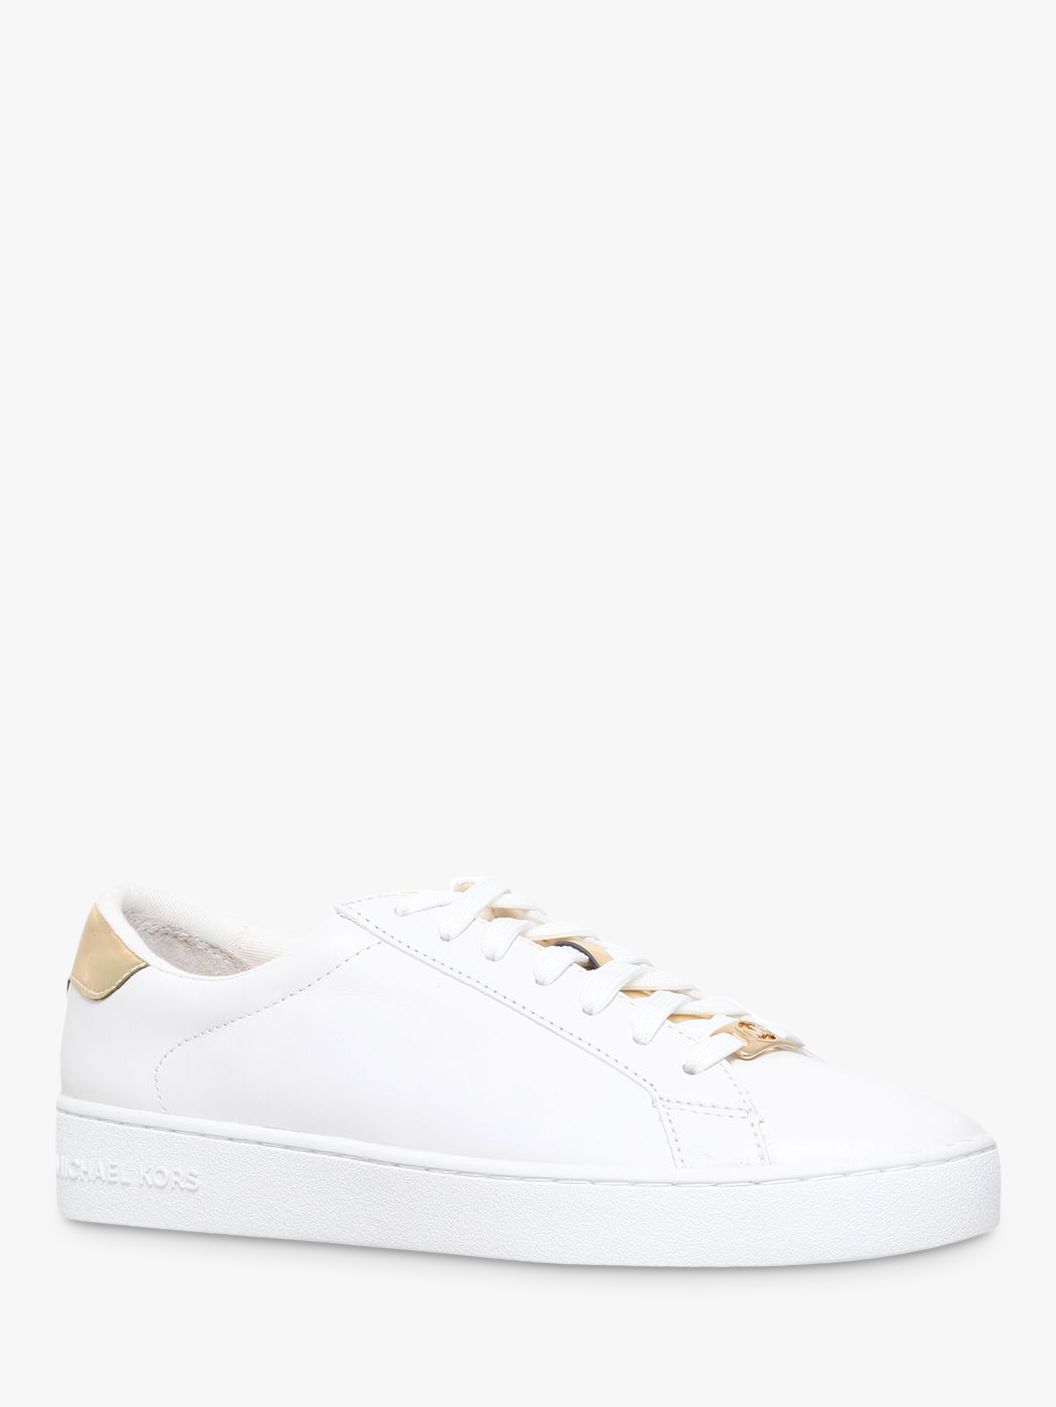 MICHAEL Michael Kors Irving Flat Trainers, White/Gold Leather